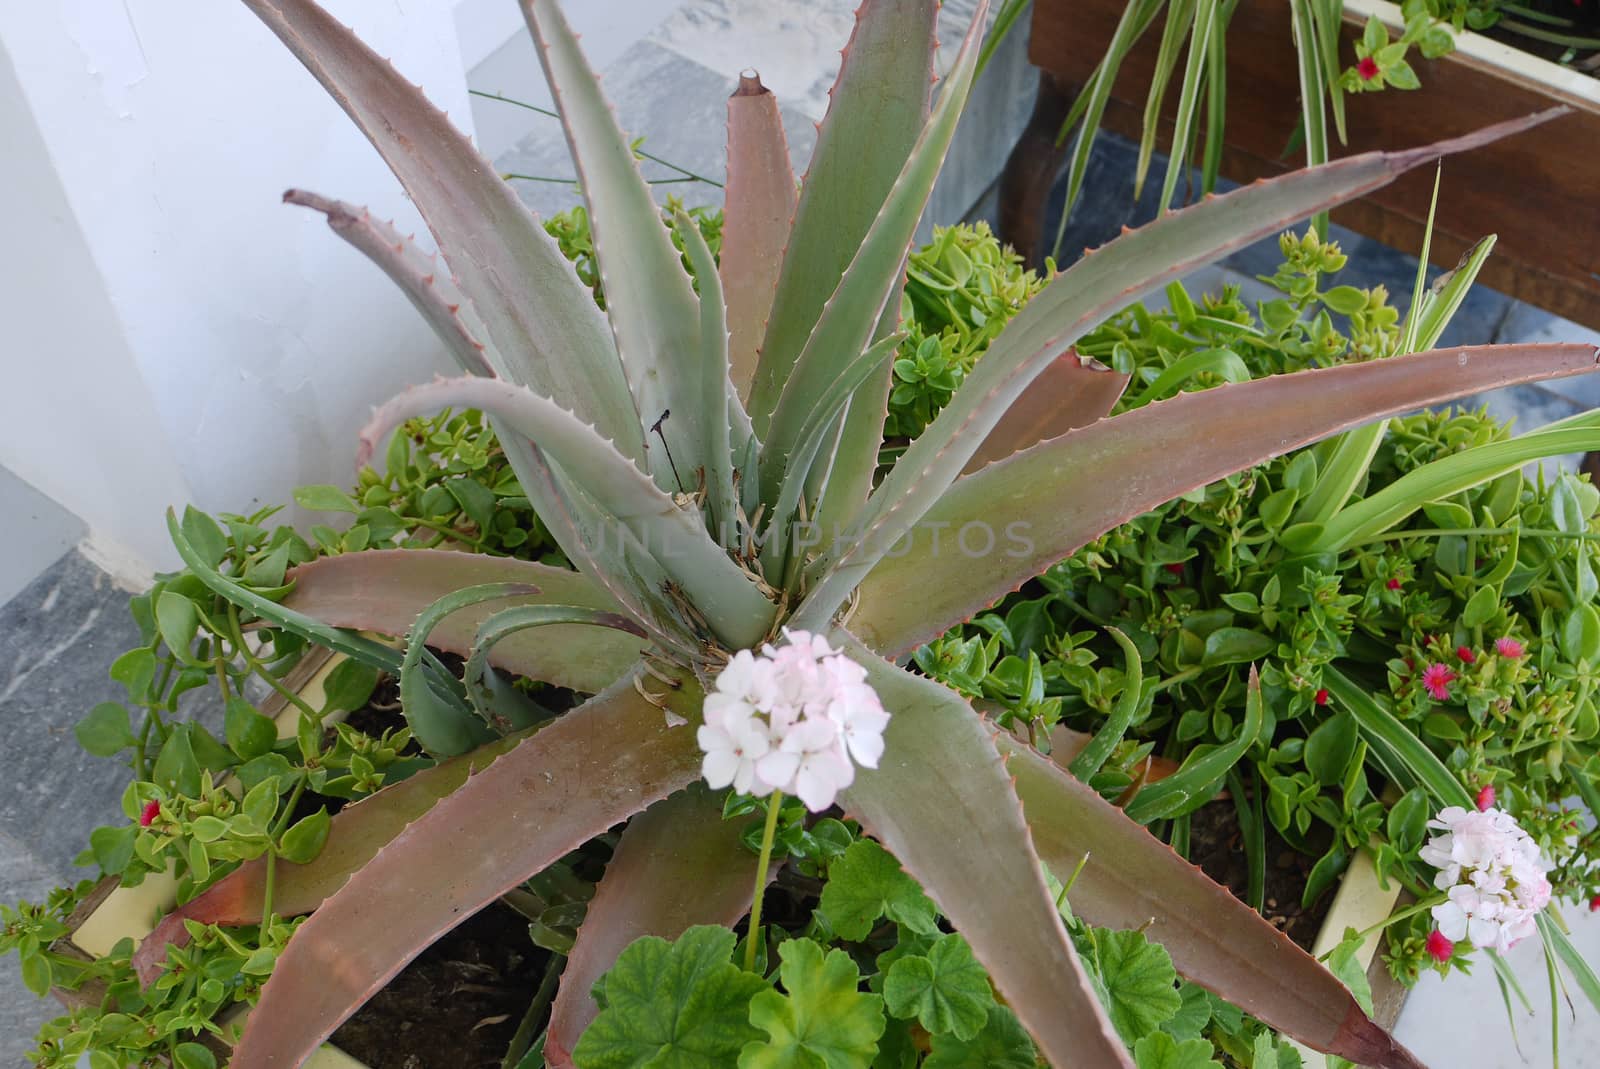 A spiny, large aloe flower is surrounded by small white and pink flowers by Adamchuk